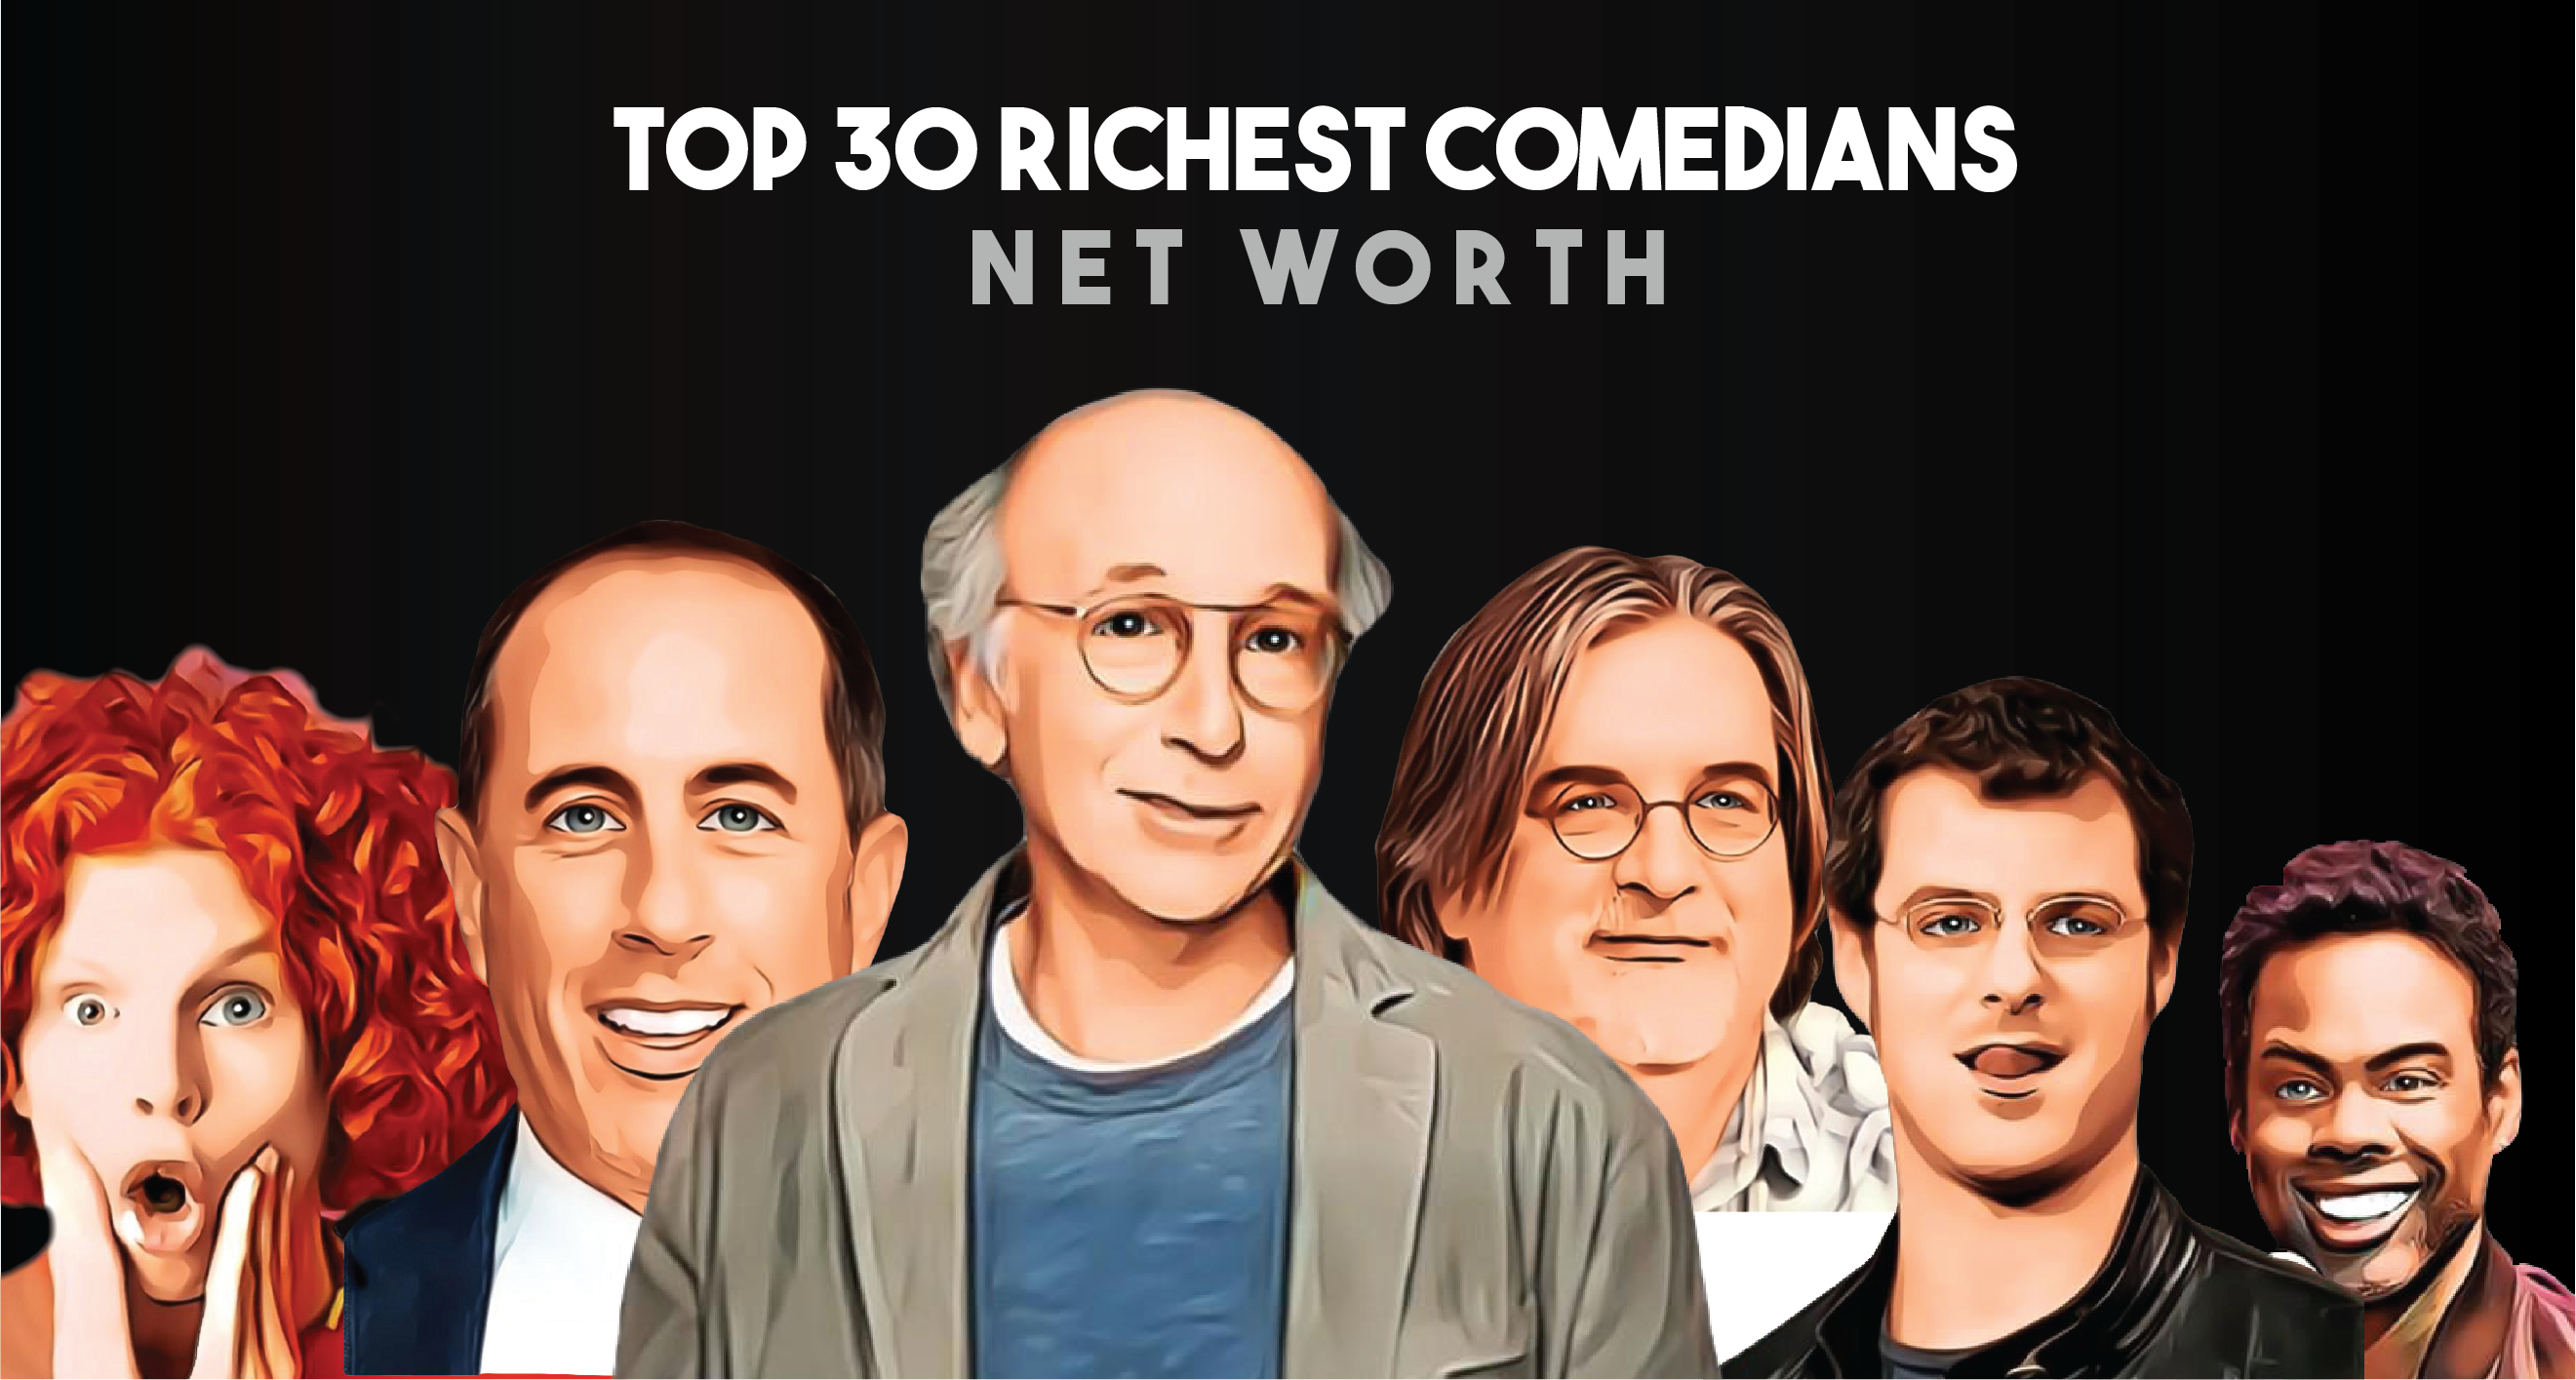 The Top 30 Richest Comedians in the World